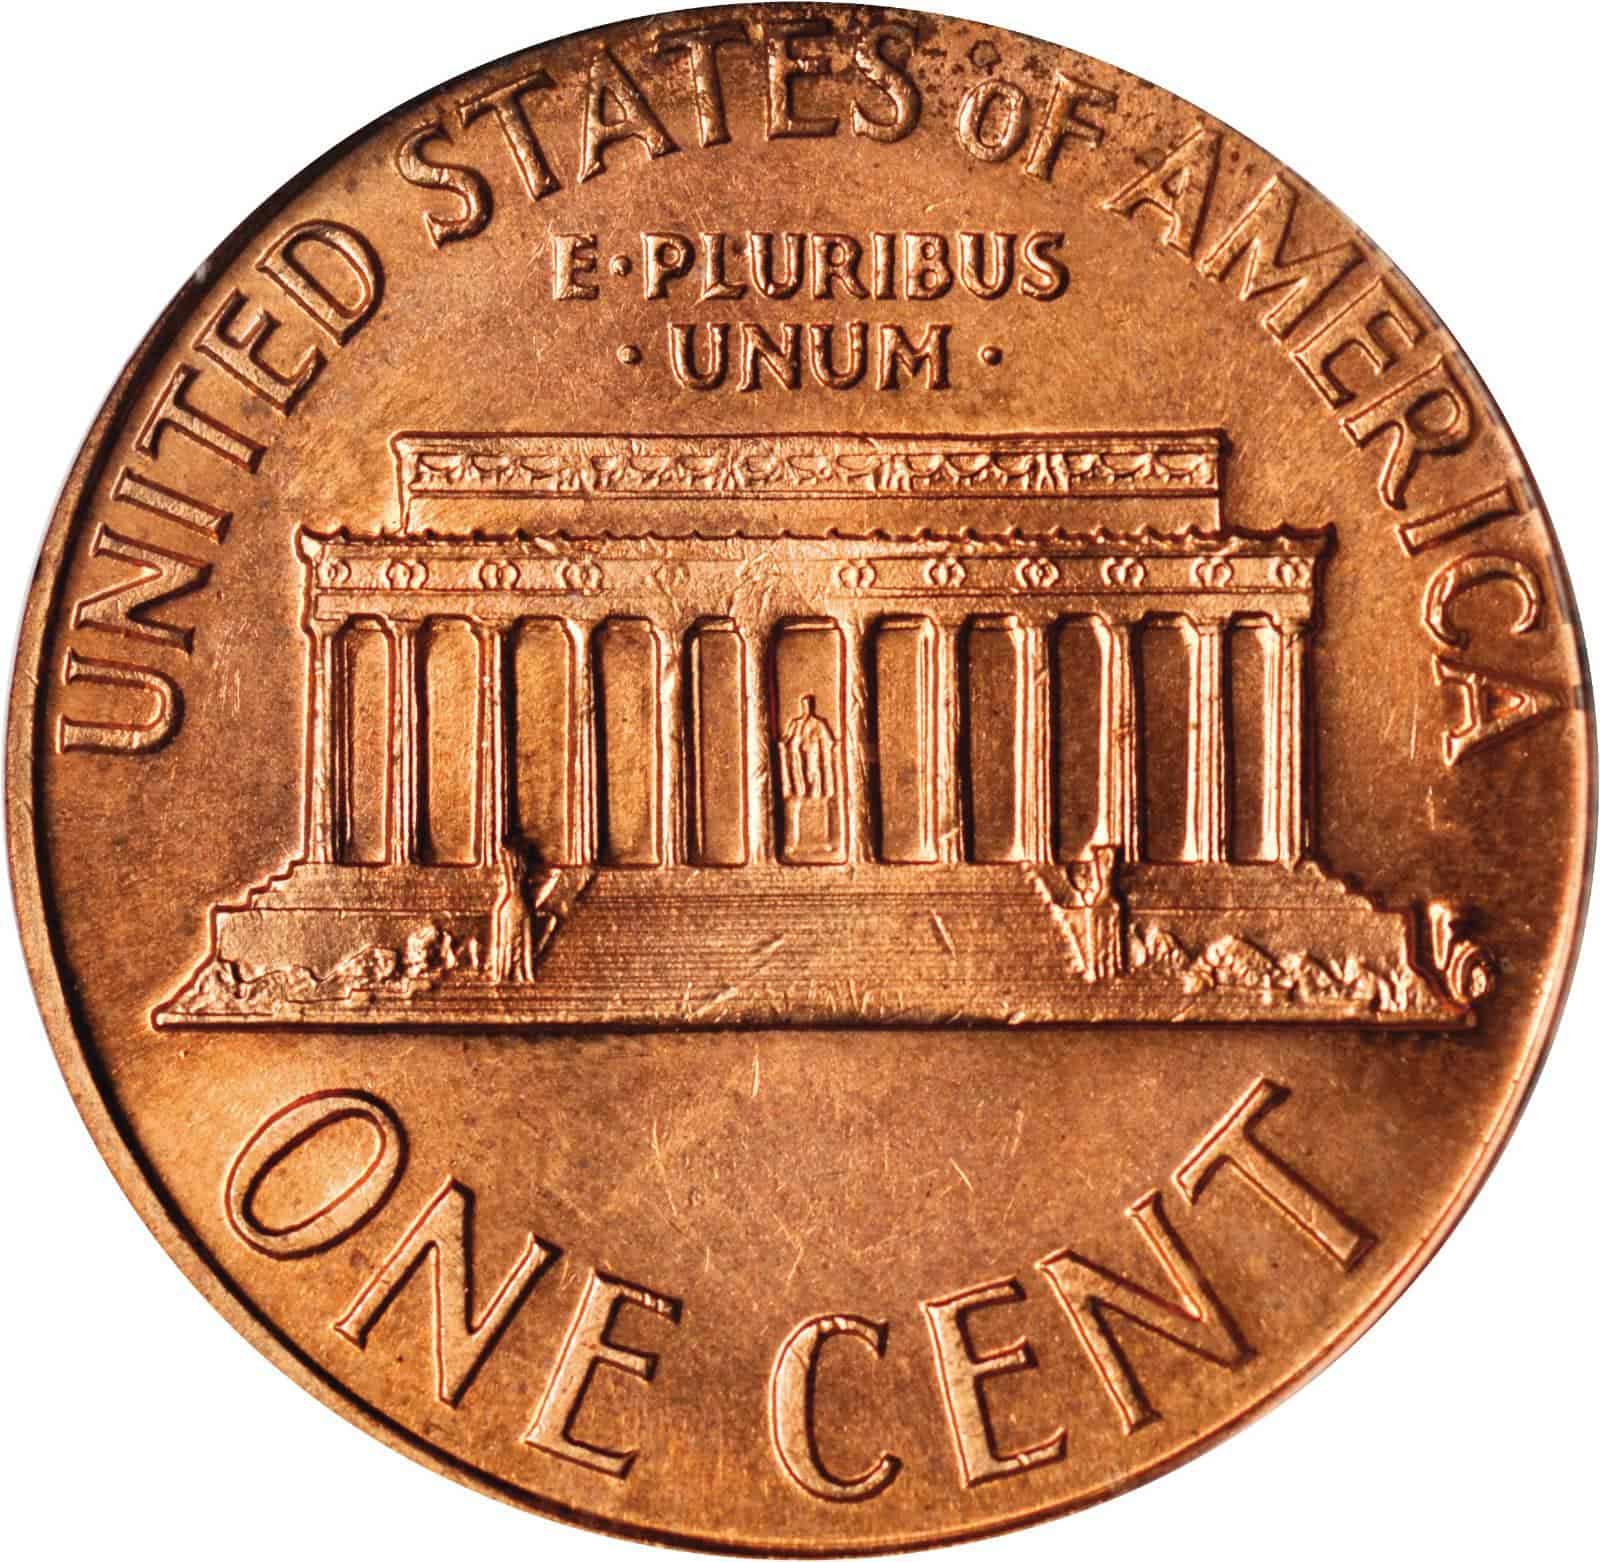 The Reverse of the 1973 Penny